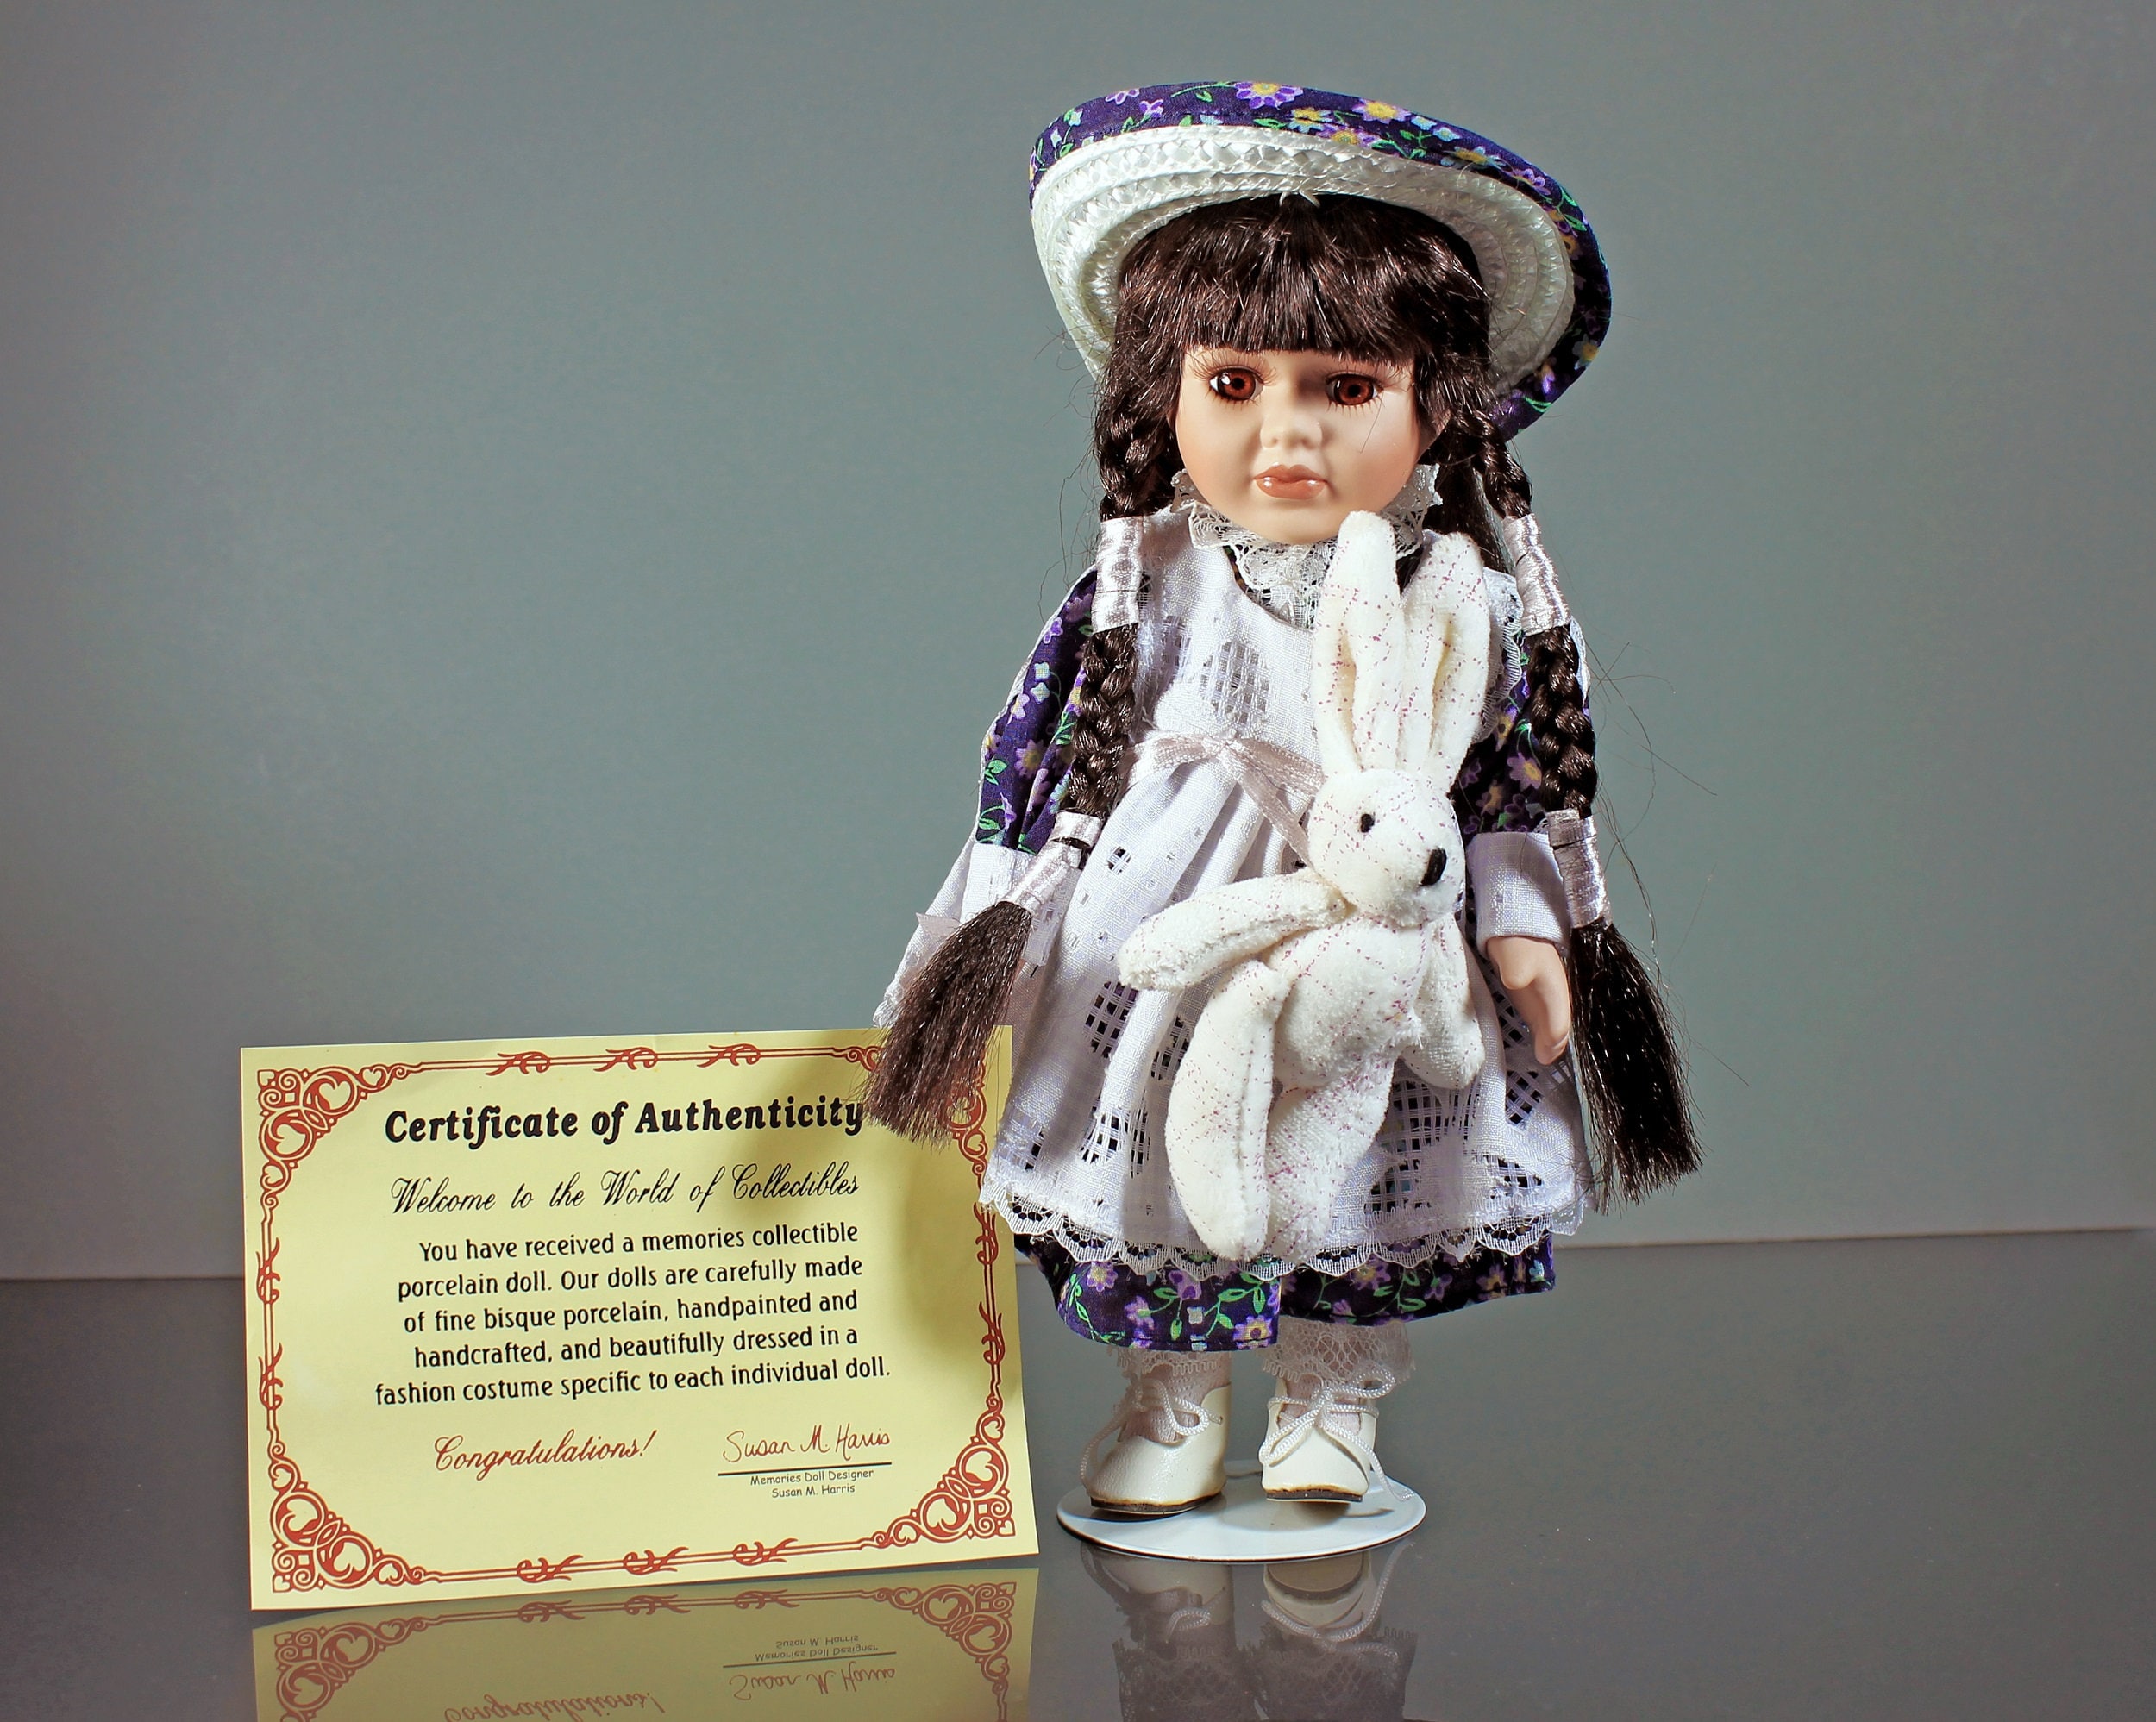 What is the difference between porcelain and bisque dolls? – JST Design